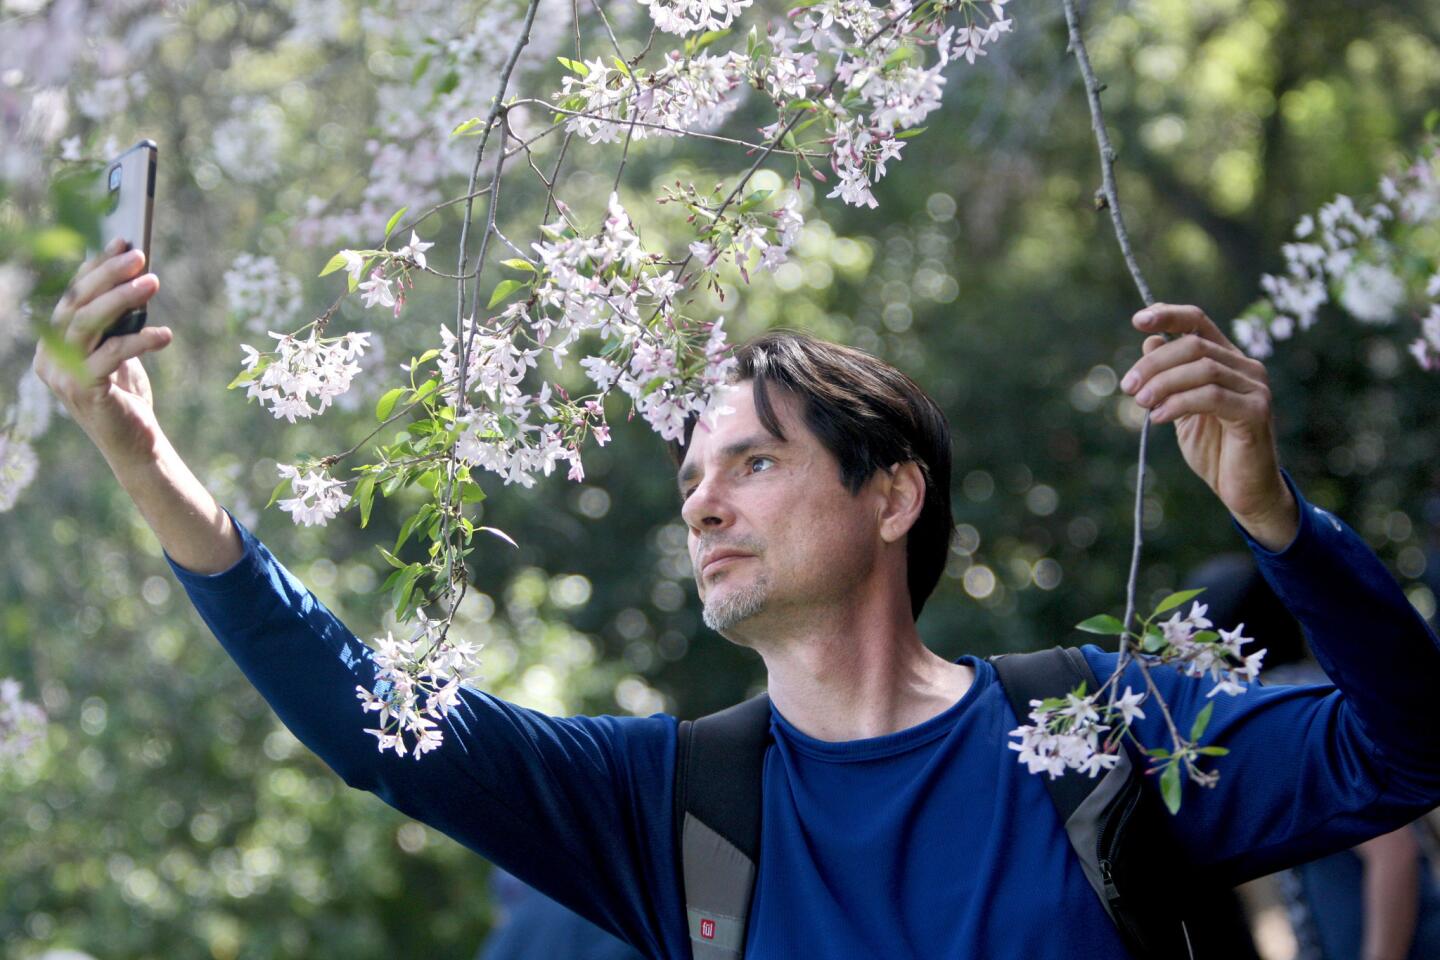 Joe Lenti of Torrance takes a selfie next to a large blossoming Cherry tree during the Cherry Blossom Festival at Descanso Gardens in La Cañada Flintridge on Saturday, March 12, 2016. Unusually large crowds waited in line to get into the county park, but there was not limit on guests.